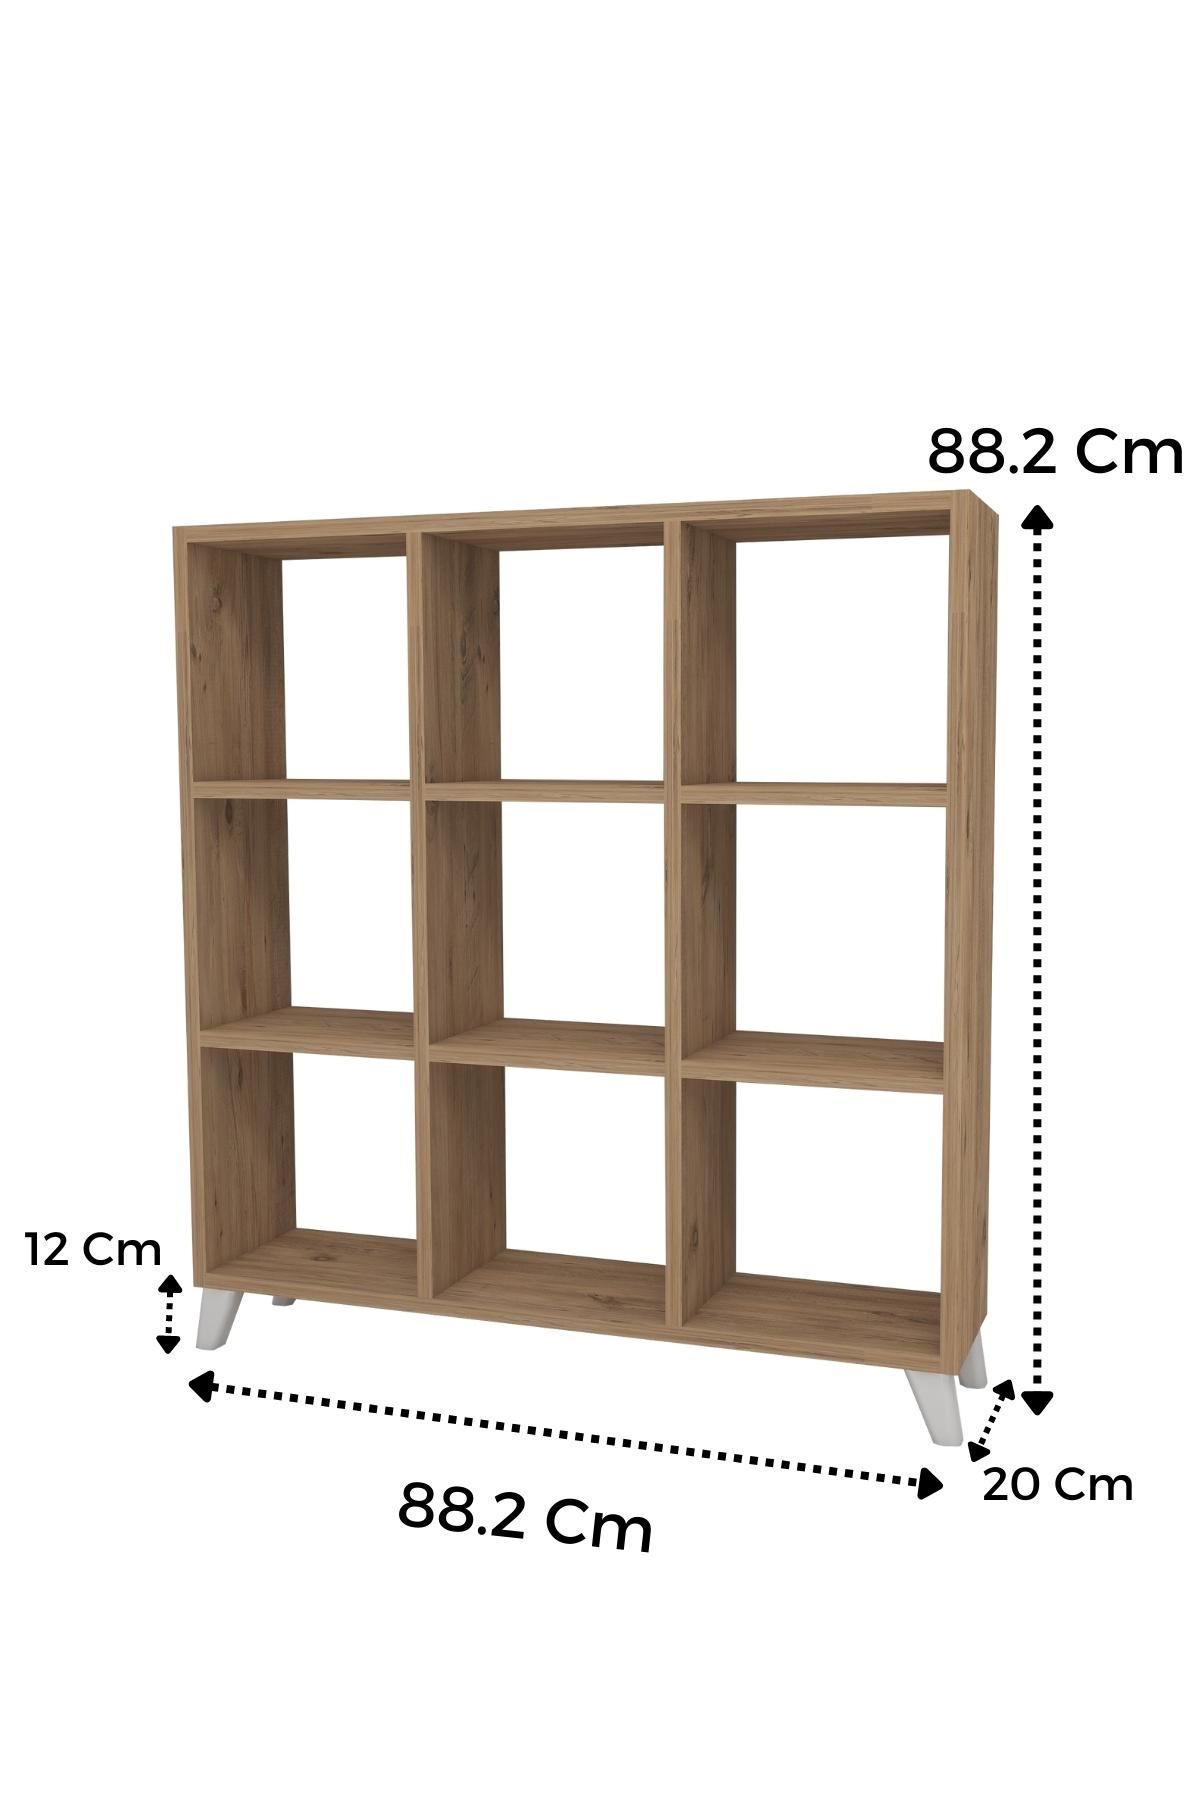 Bofigo Cube Bookshelf with 9 Sections and Shelves Square Bookcase Library Pine